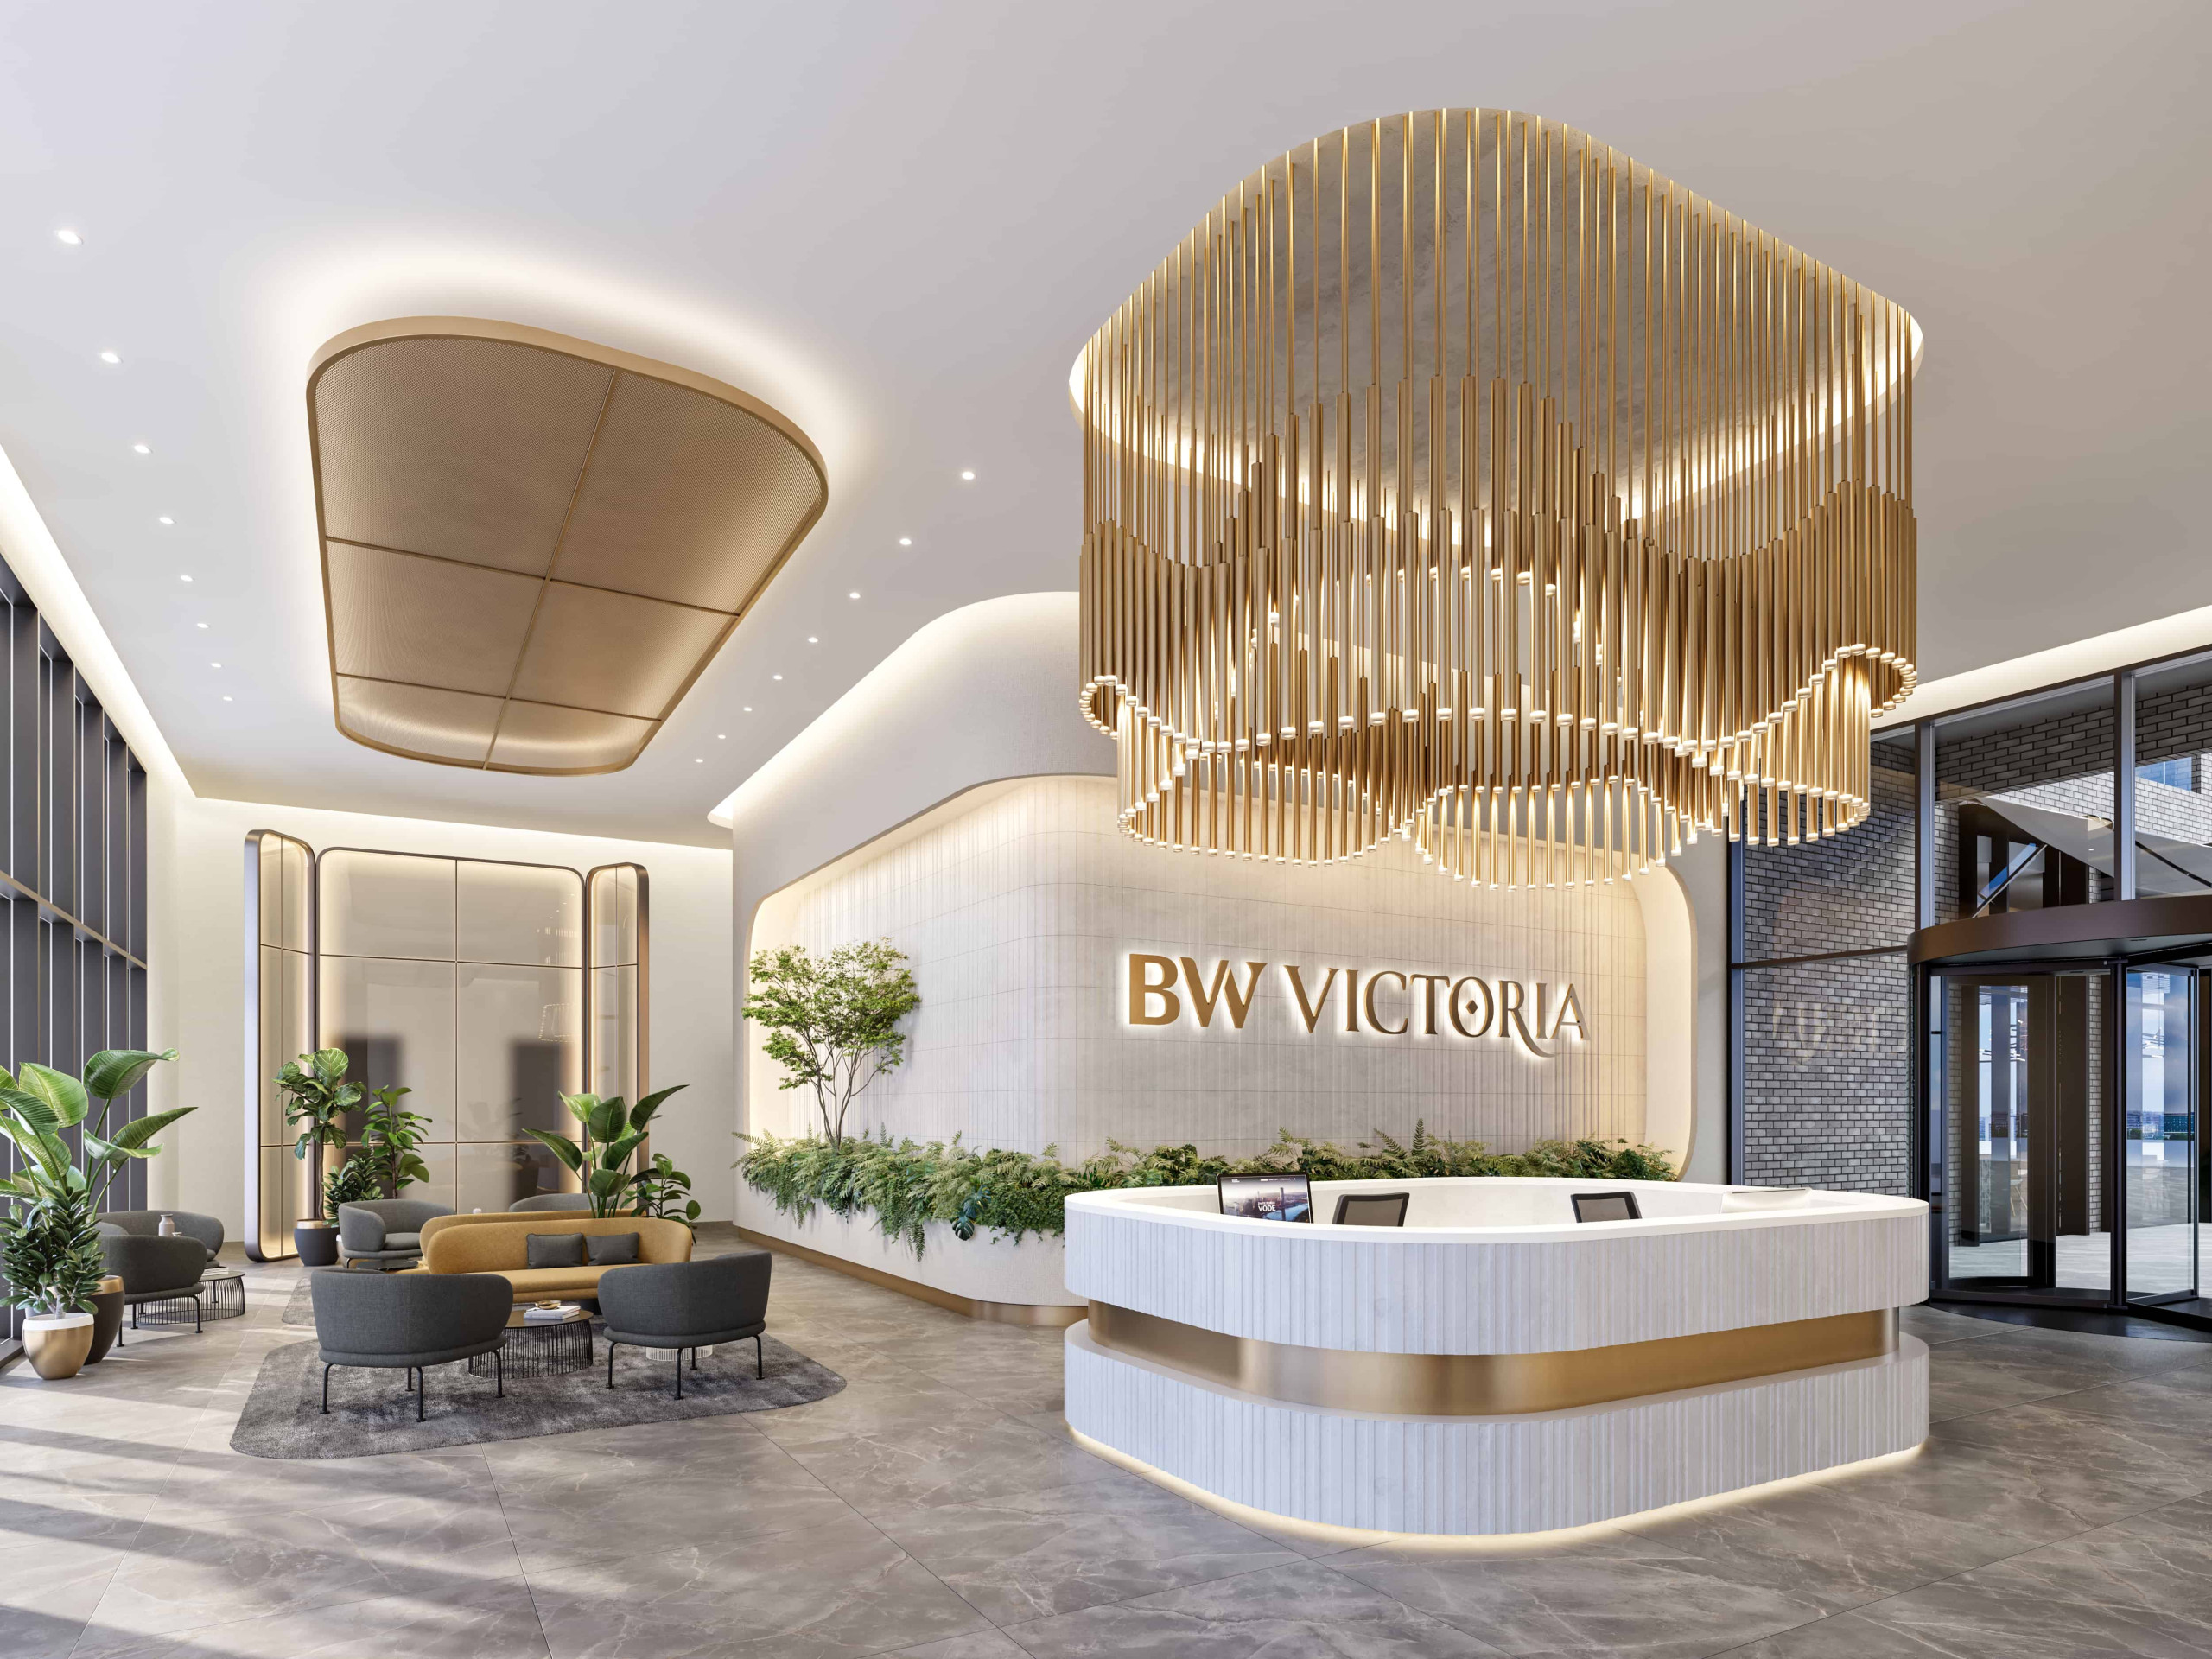 The lobby in the BW Victoria building in Belgrade Waterfront